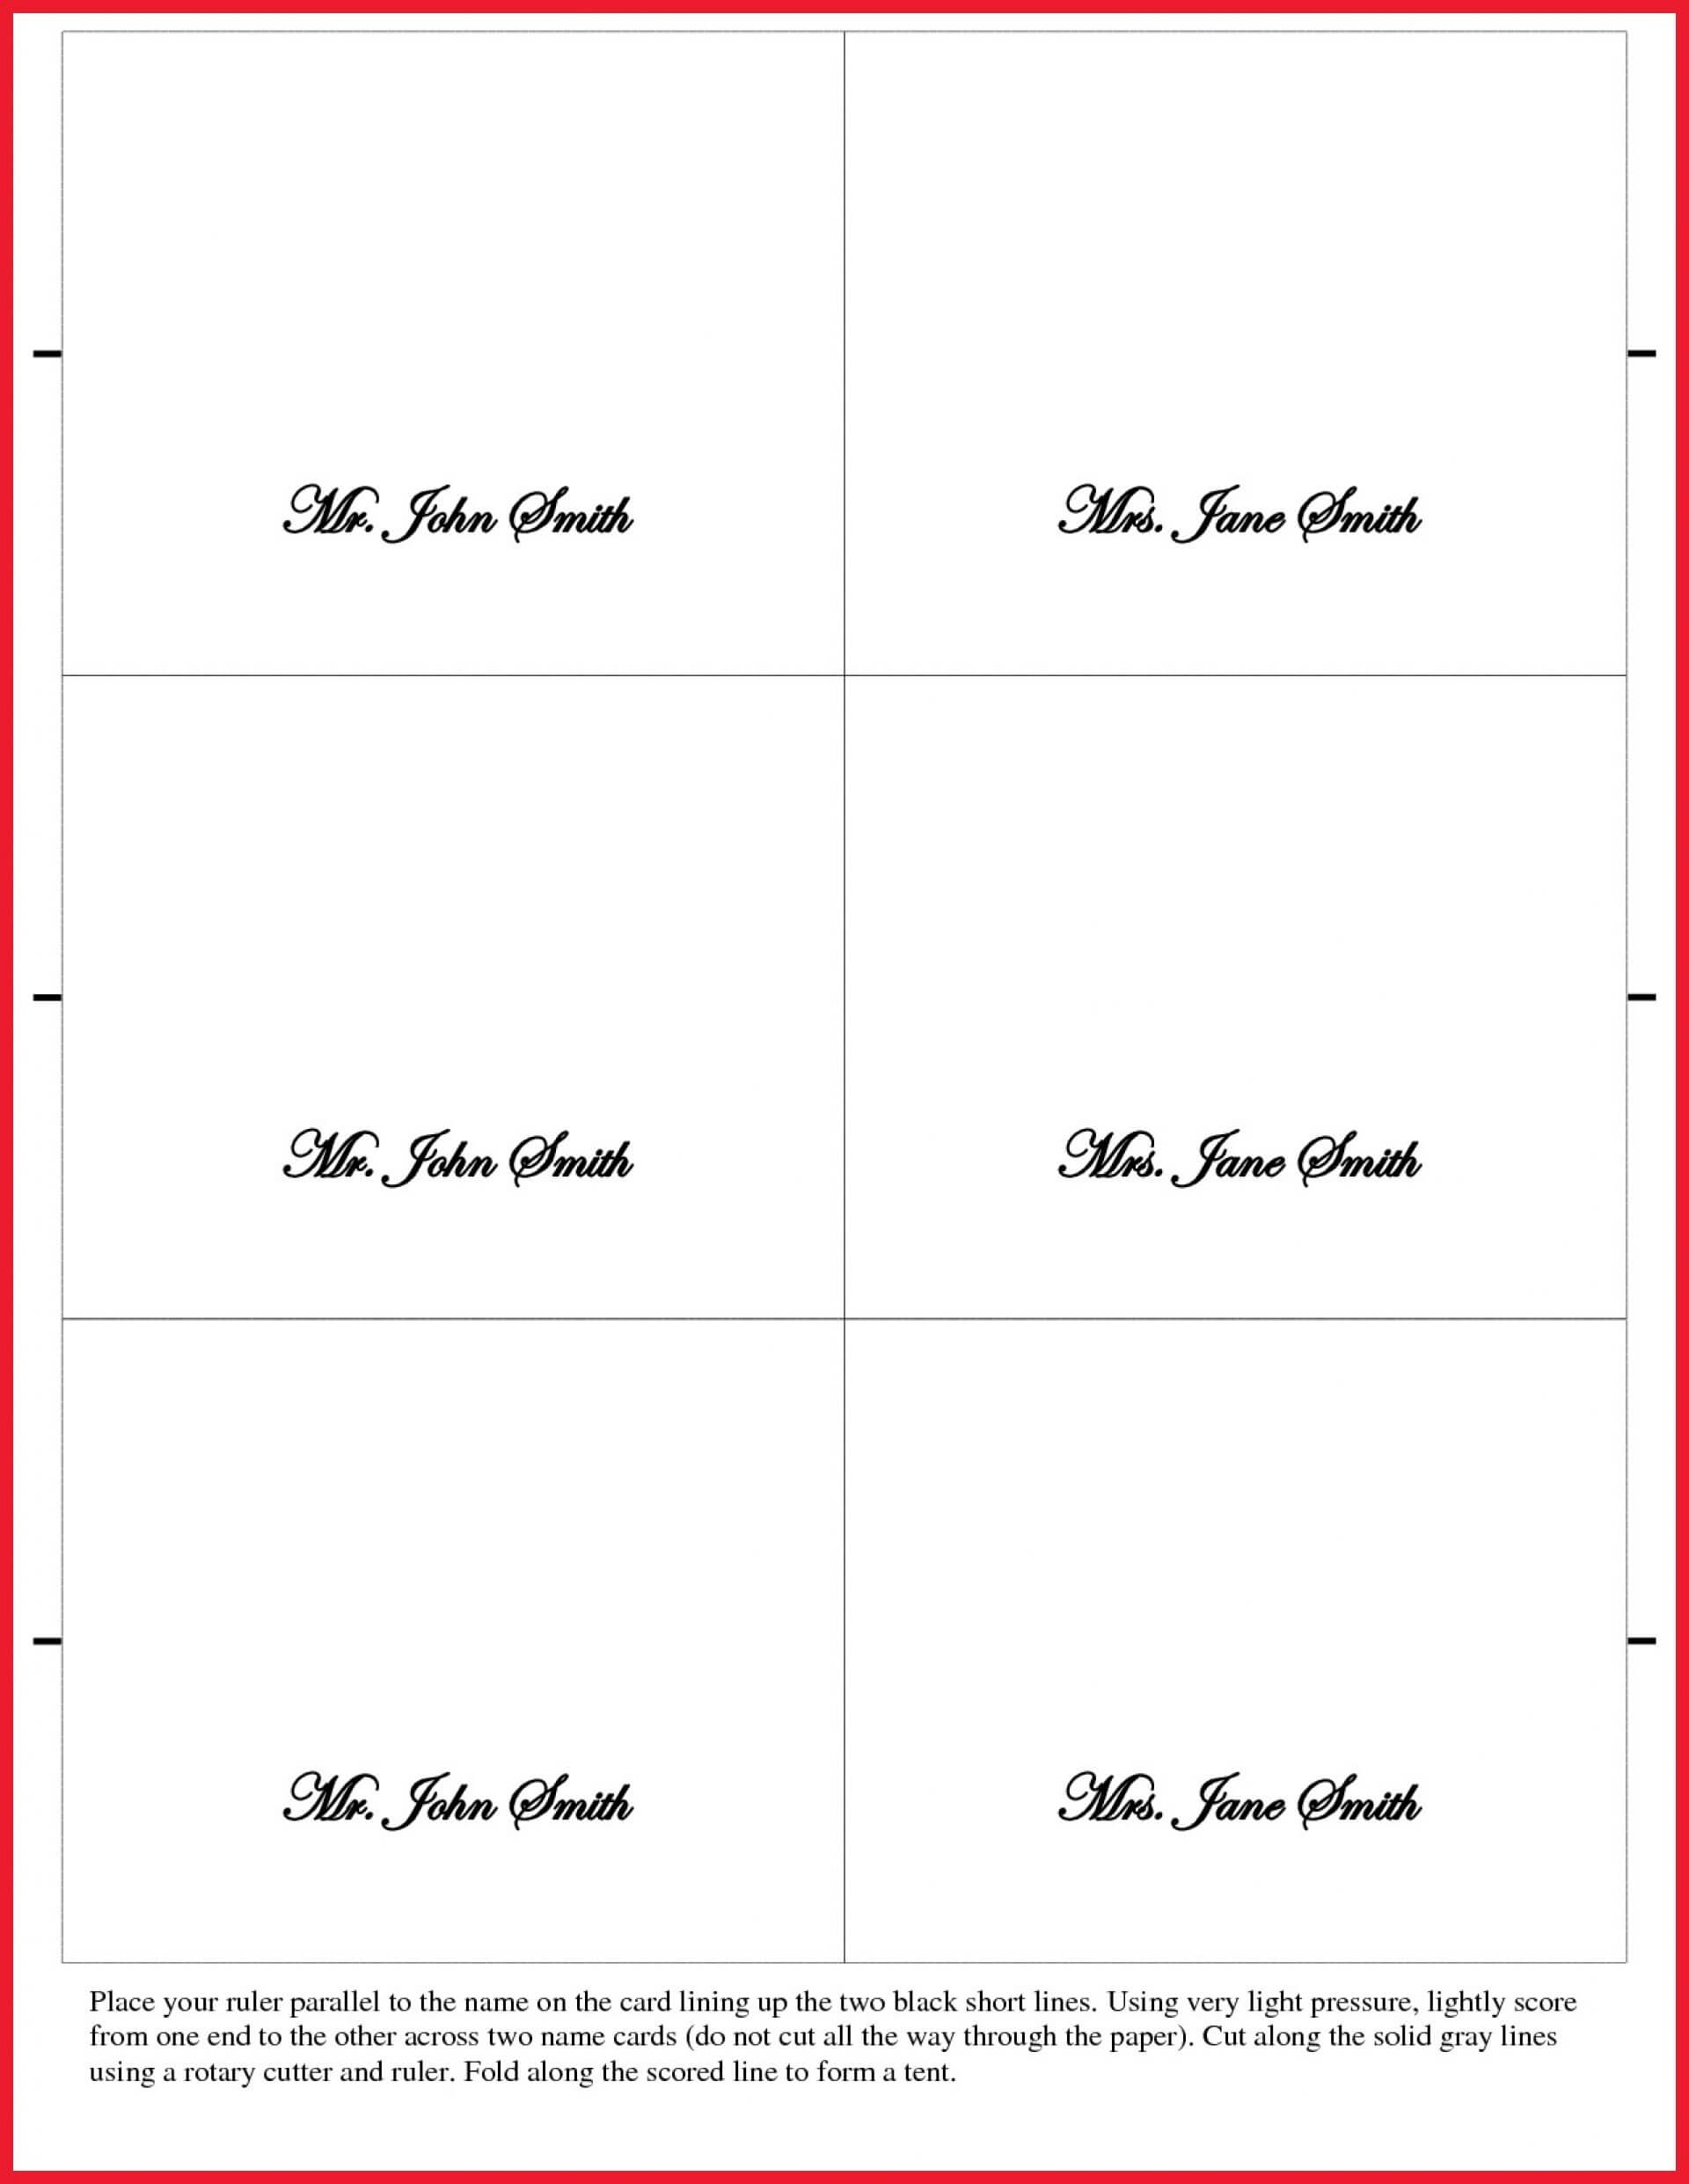 006 Bunch Ideas For Fold Over Place Card Template About With Regard To Fold Over Place Card Template